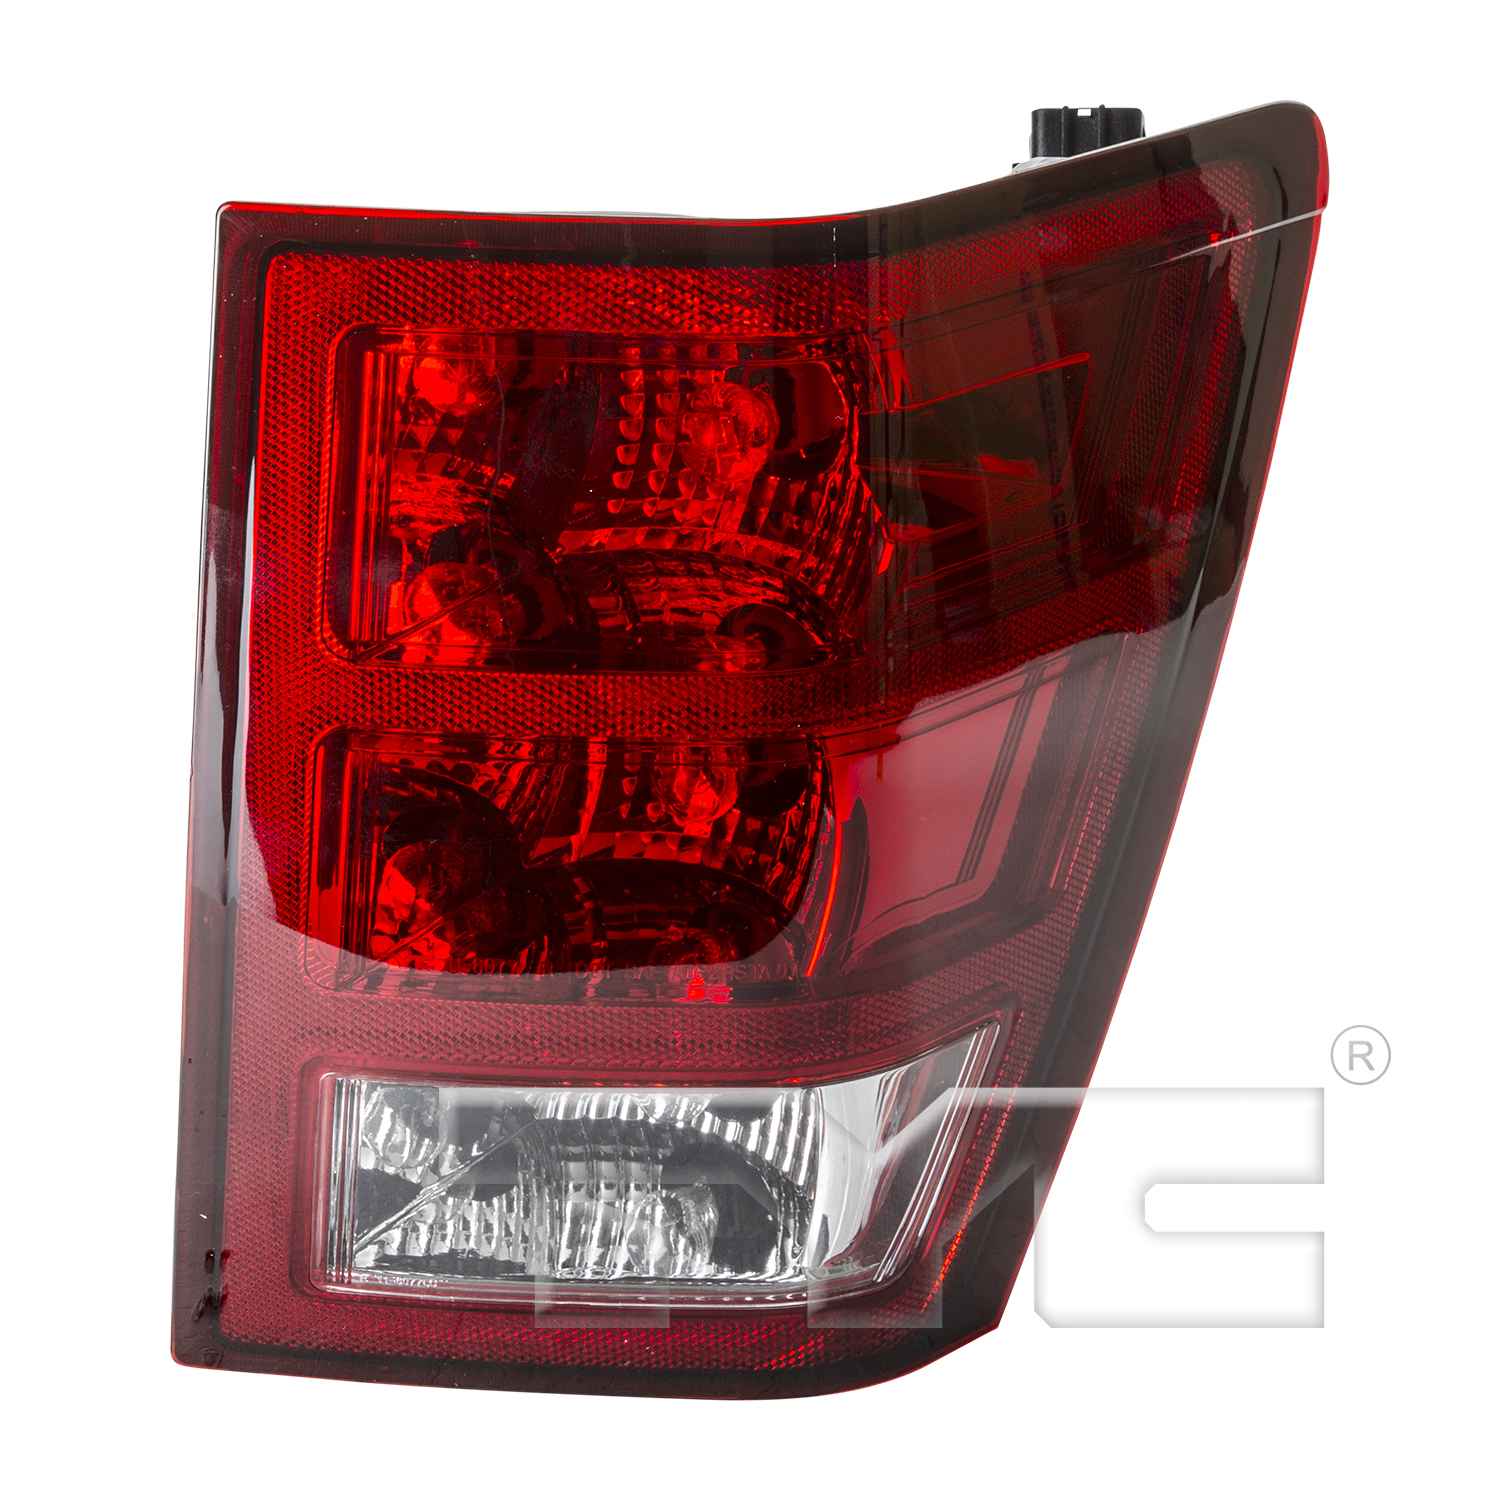 Aftermarket TAILLIGHTS for JEEP - GRAND CHEROKEE, GRAND CHEROKEE,05-06,RT Taillamp assy